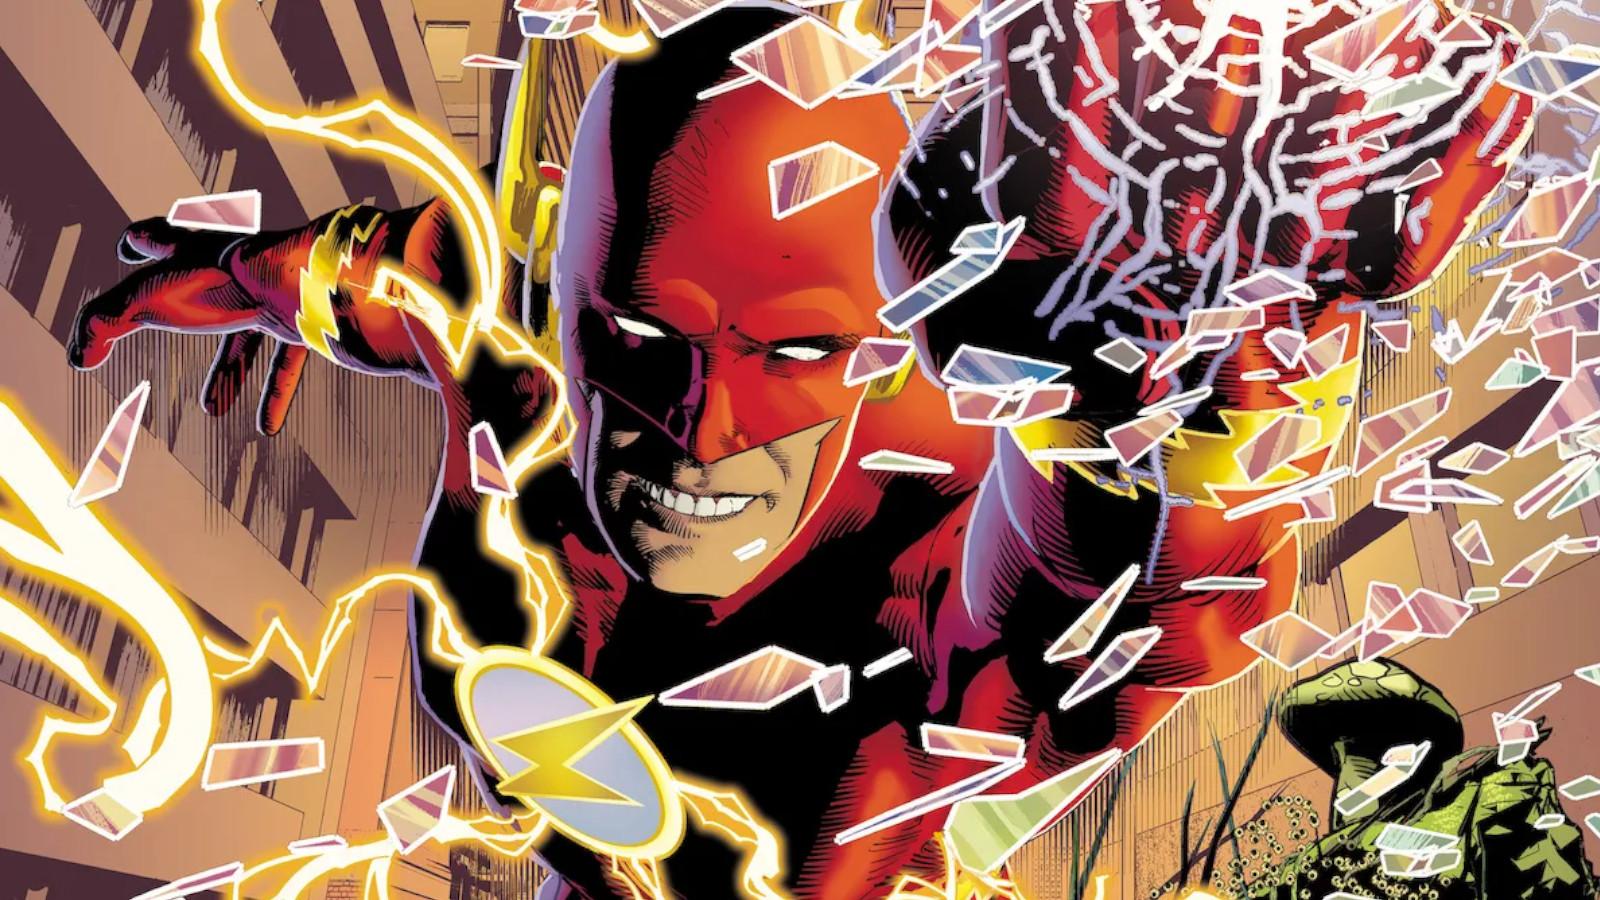 The Flash #1 cover art